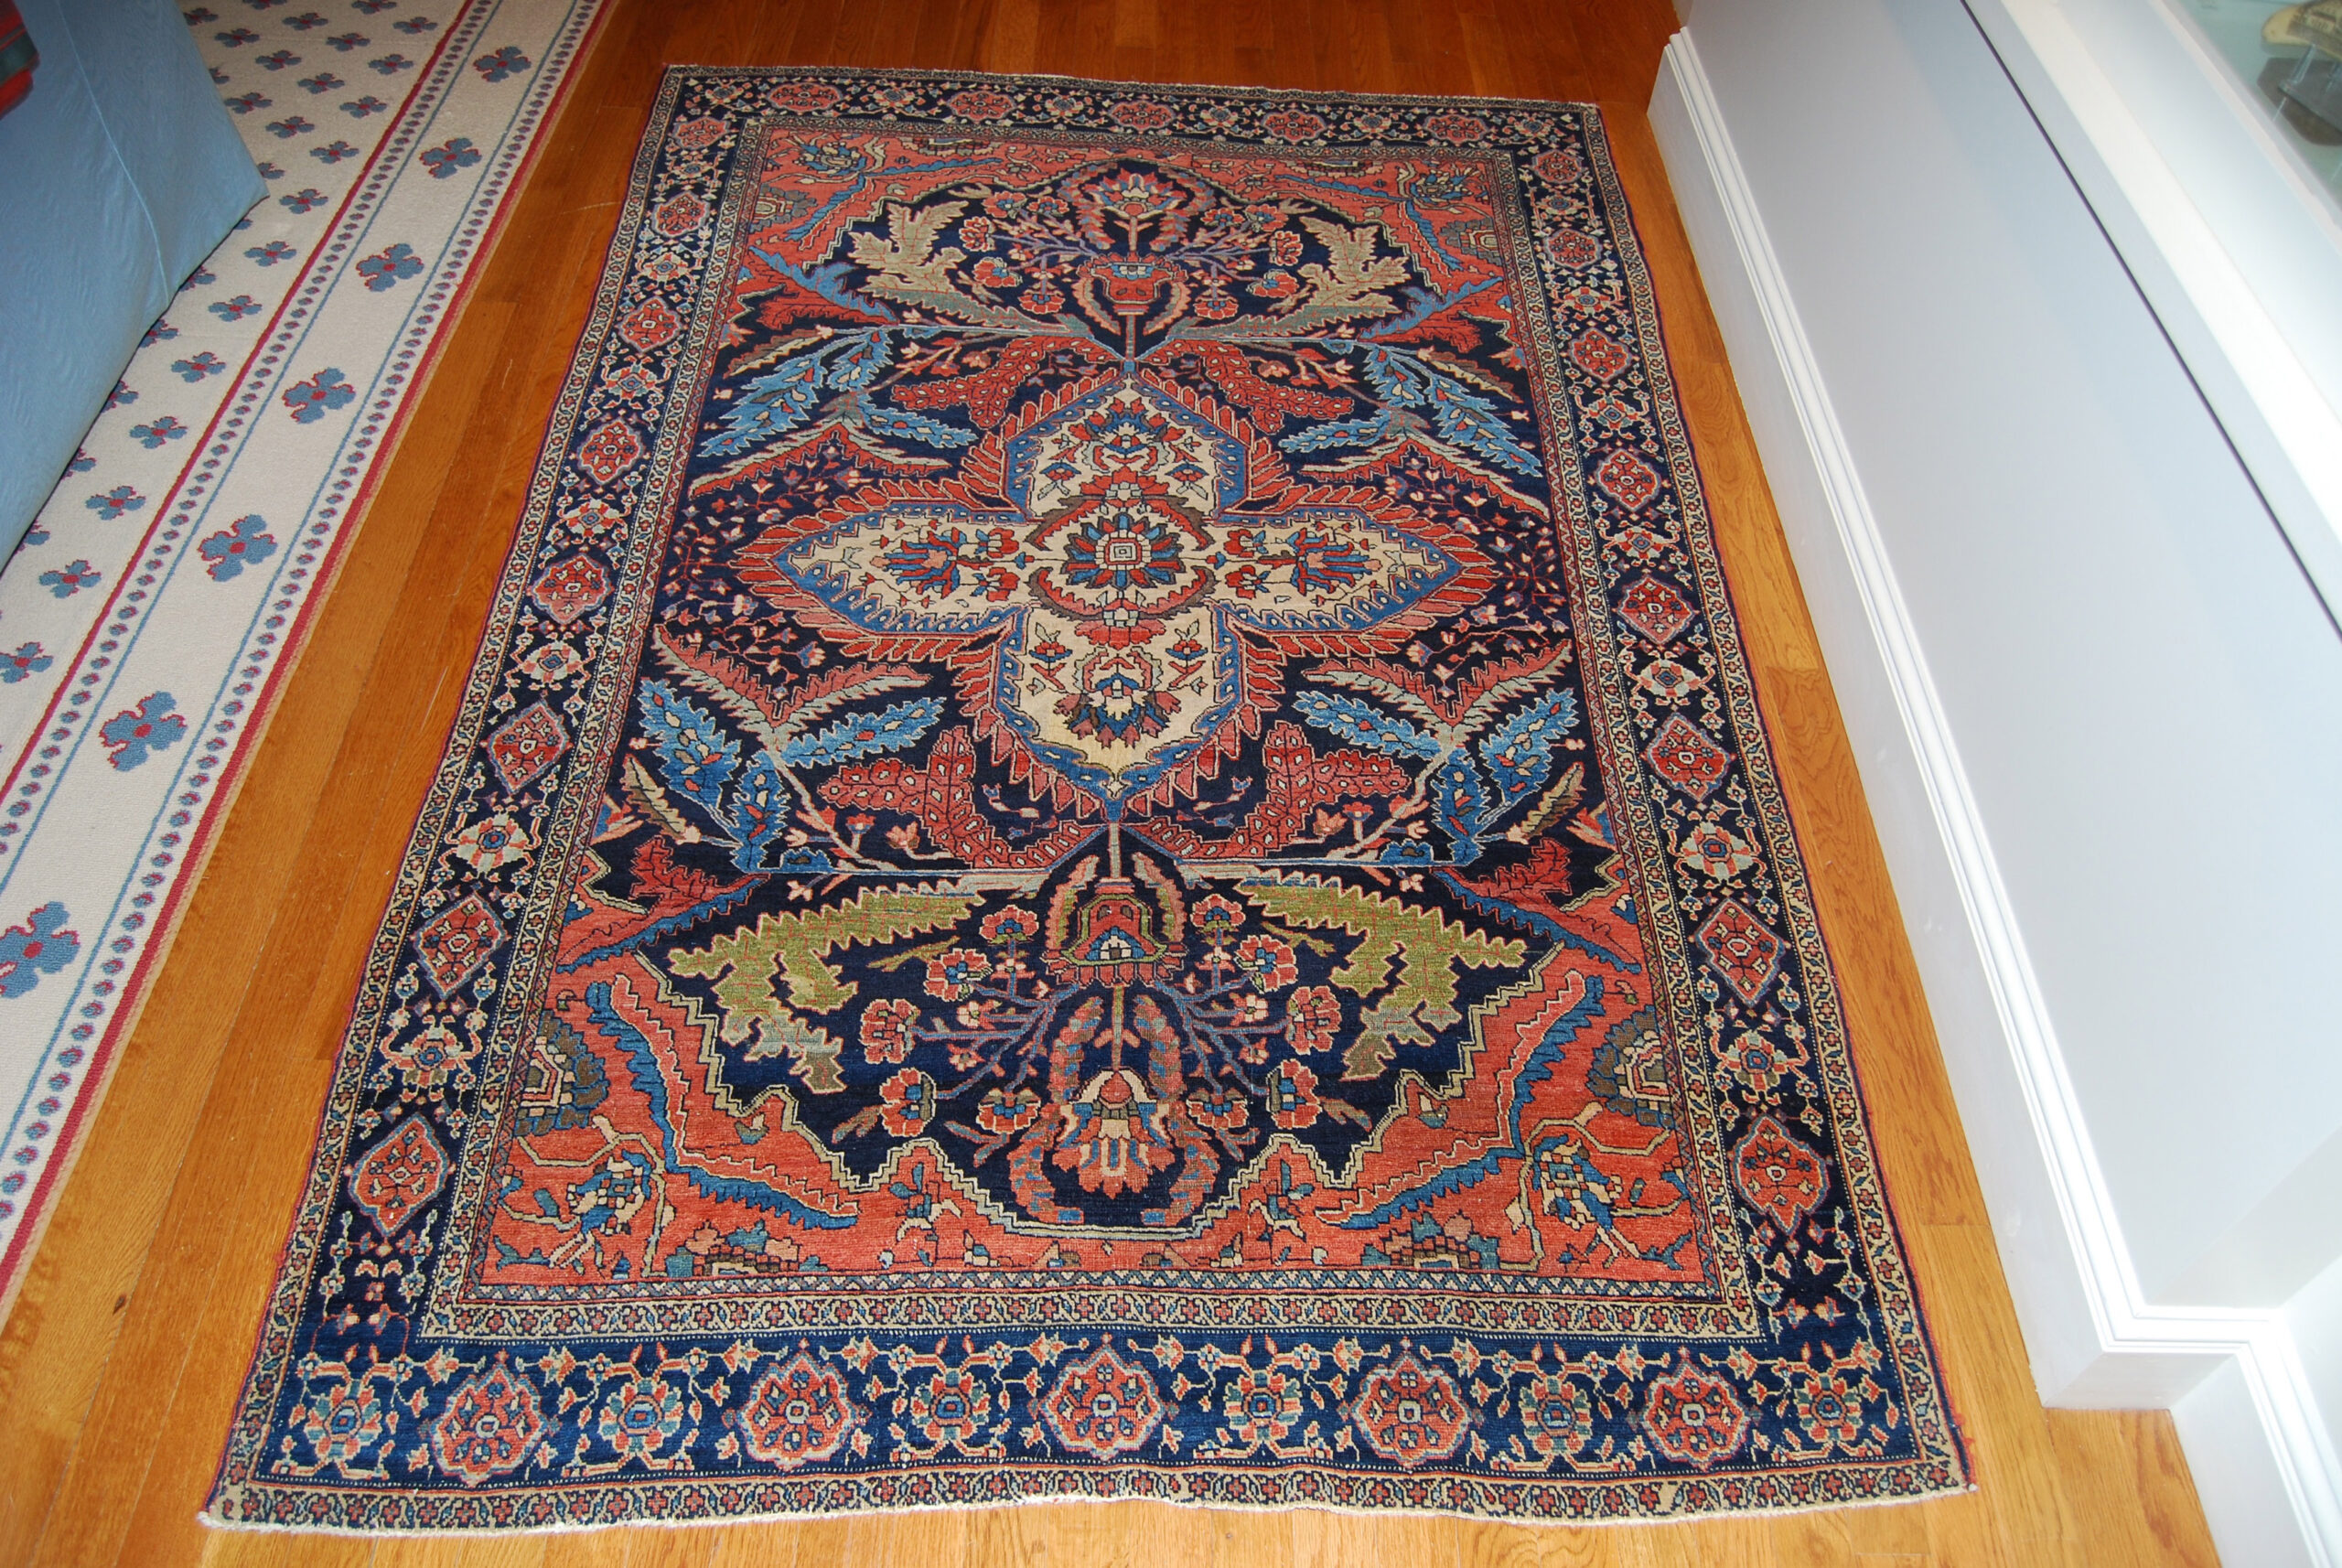 19th century central Persian Fereghan Sarouk rug displayed in the living room of a New England family home, Douglas Stock Gallery, antique rugs Boston,MA area